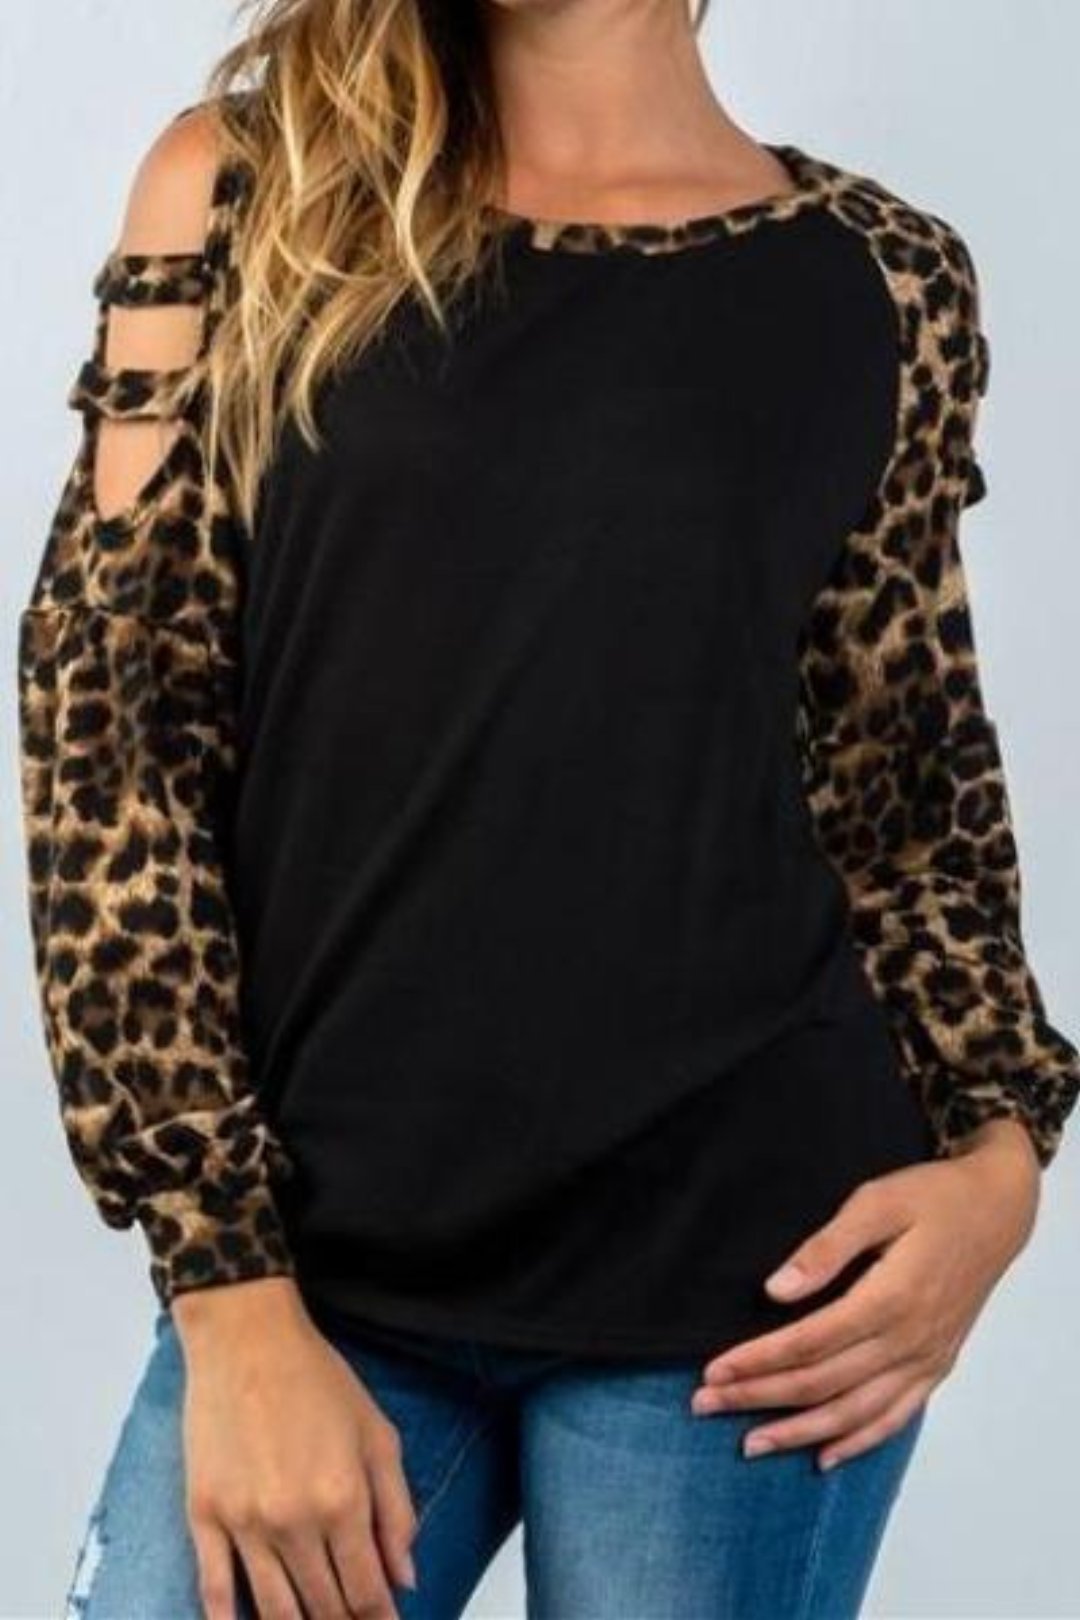 Cut Out Leopard Sleeve Top (Black)